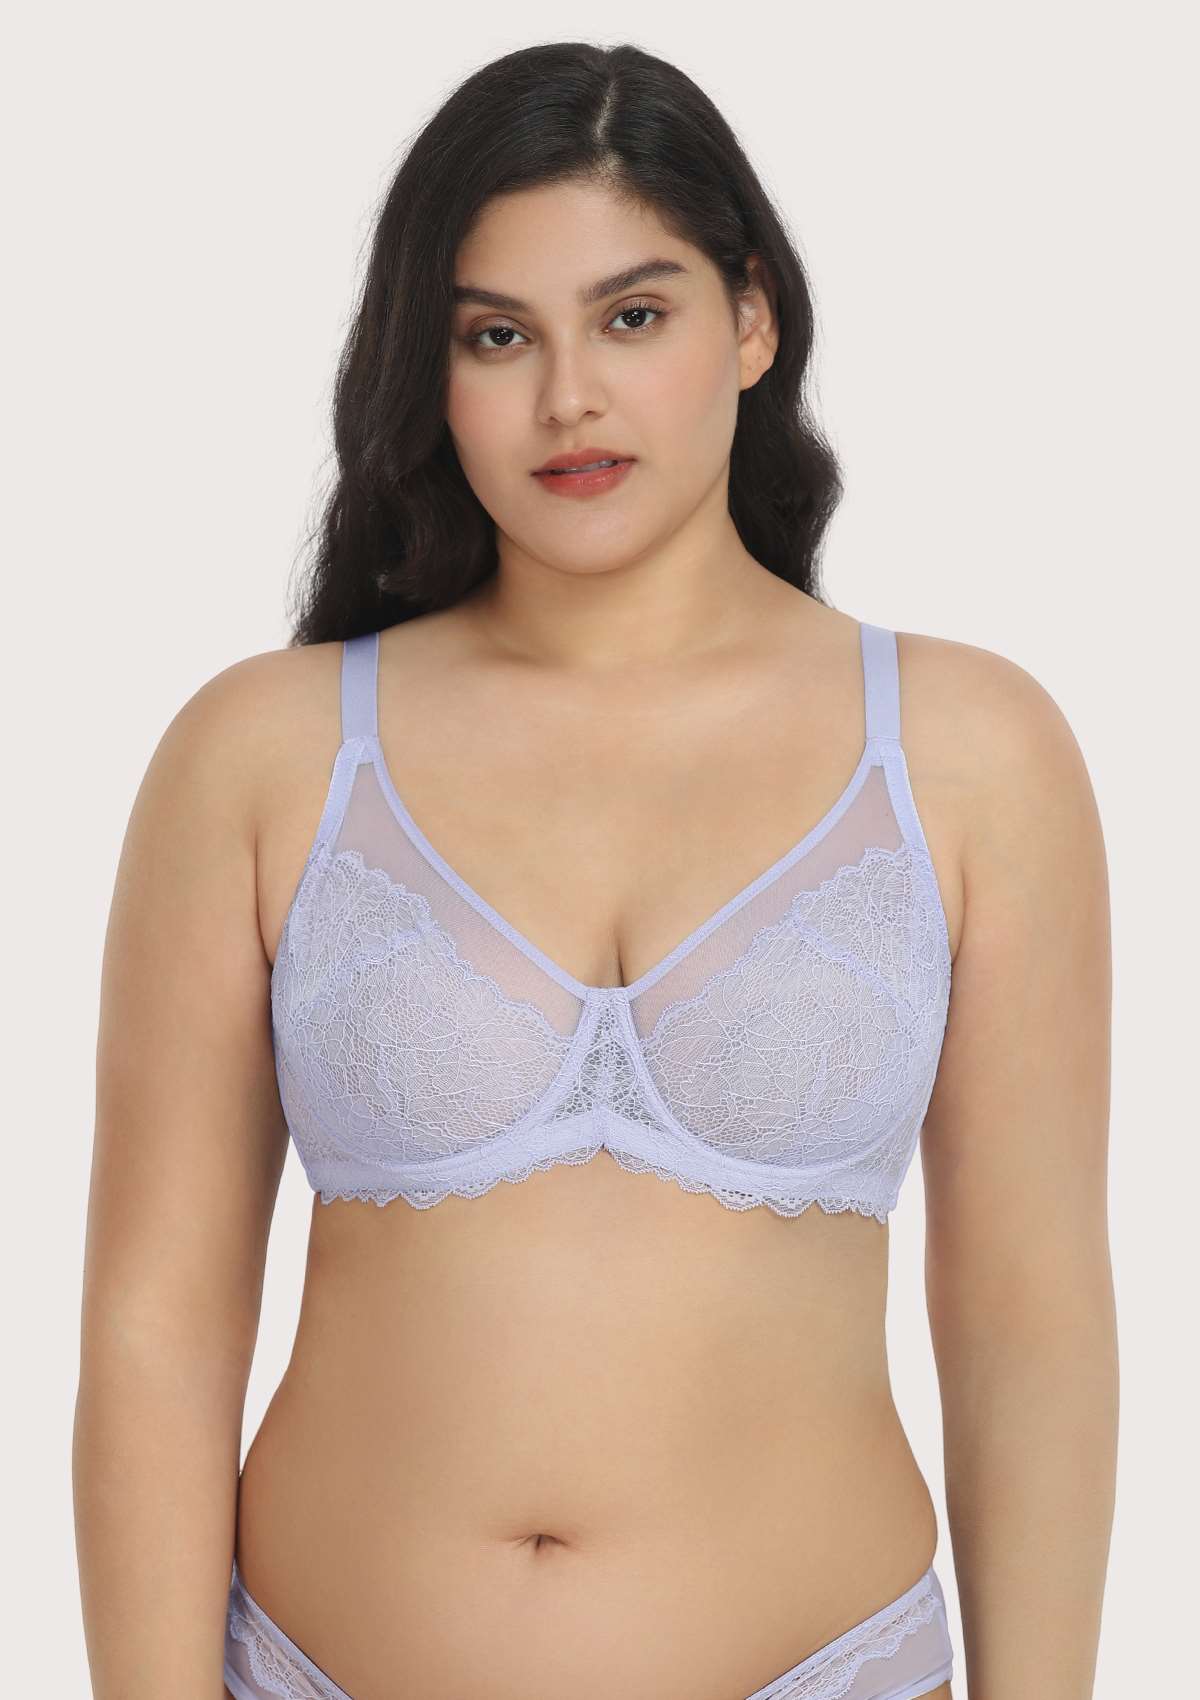 HSIA Wisteria Bra For Lift And Support - Full Coverage Minimizer Bra - Crystal Blue / 40 / DDD/F